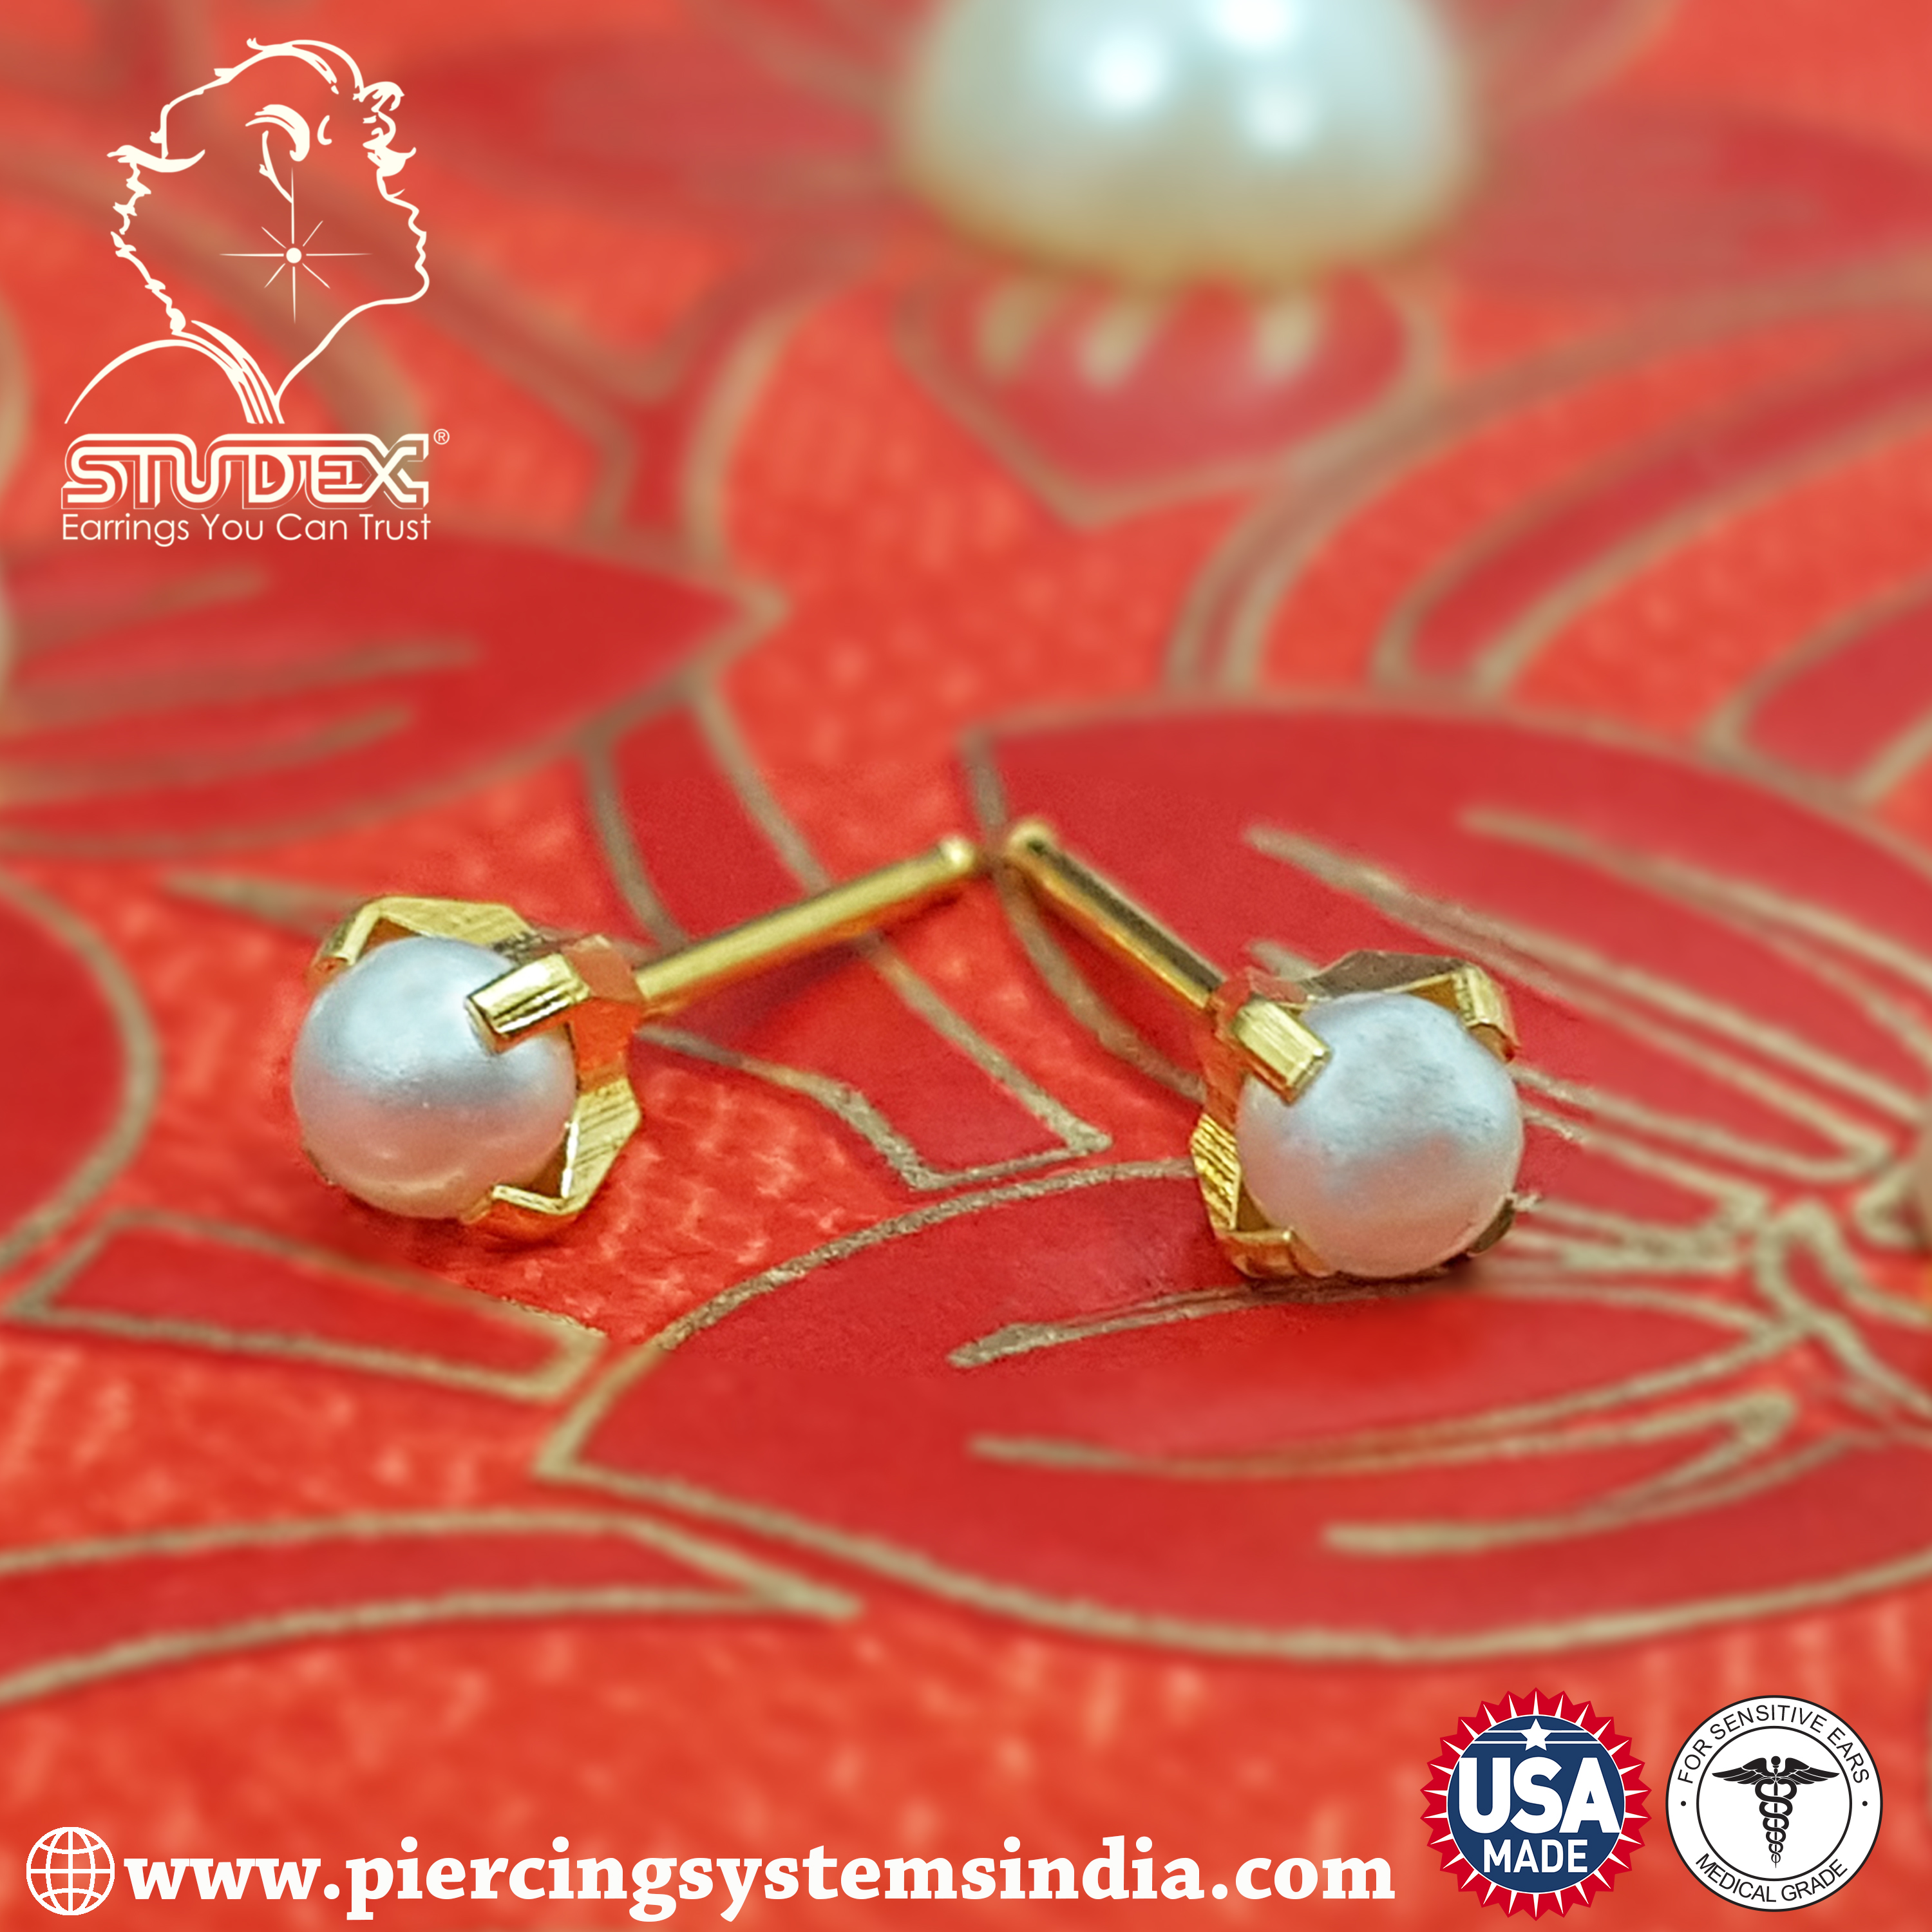 Studex Asia Introducing Studex pearls ear studs. What outfit will you be pairing these with??? shop now!